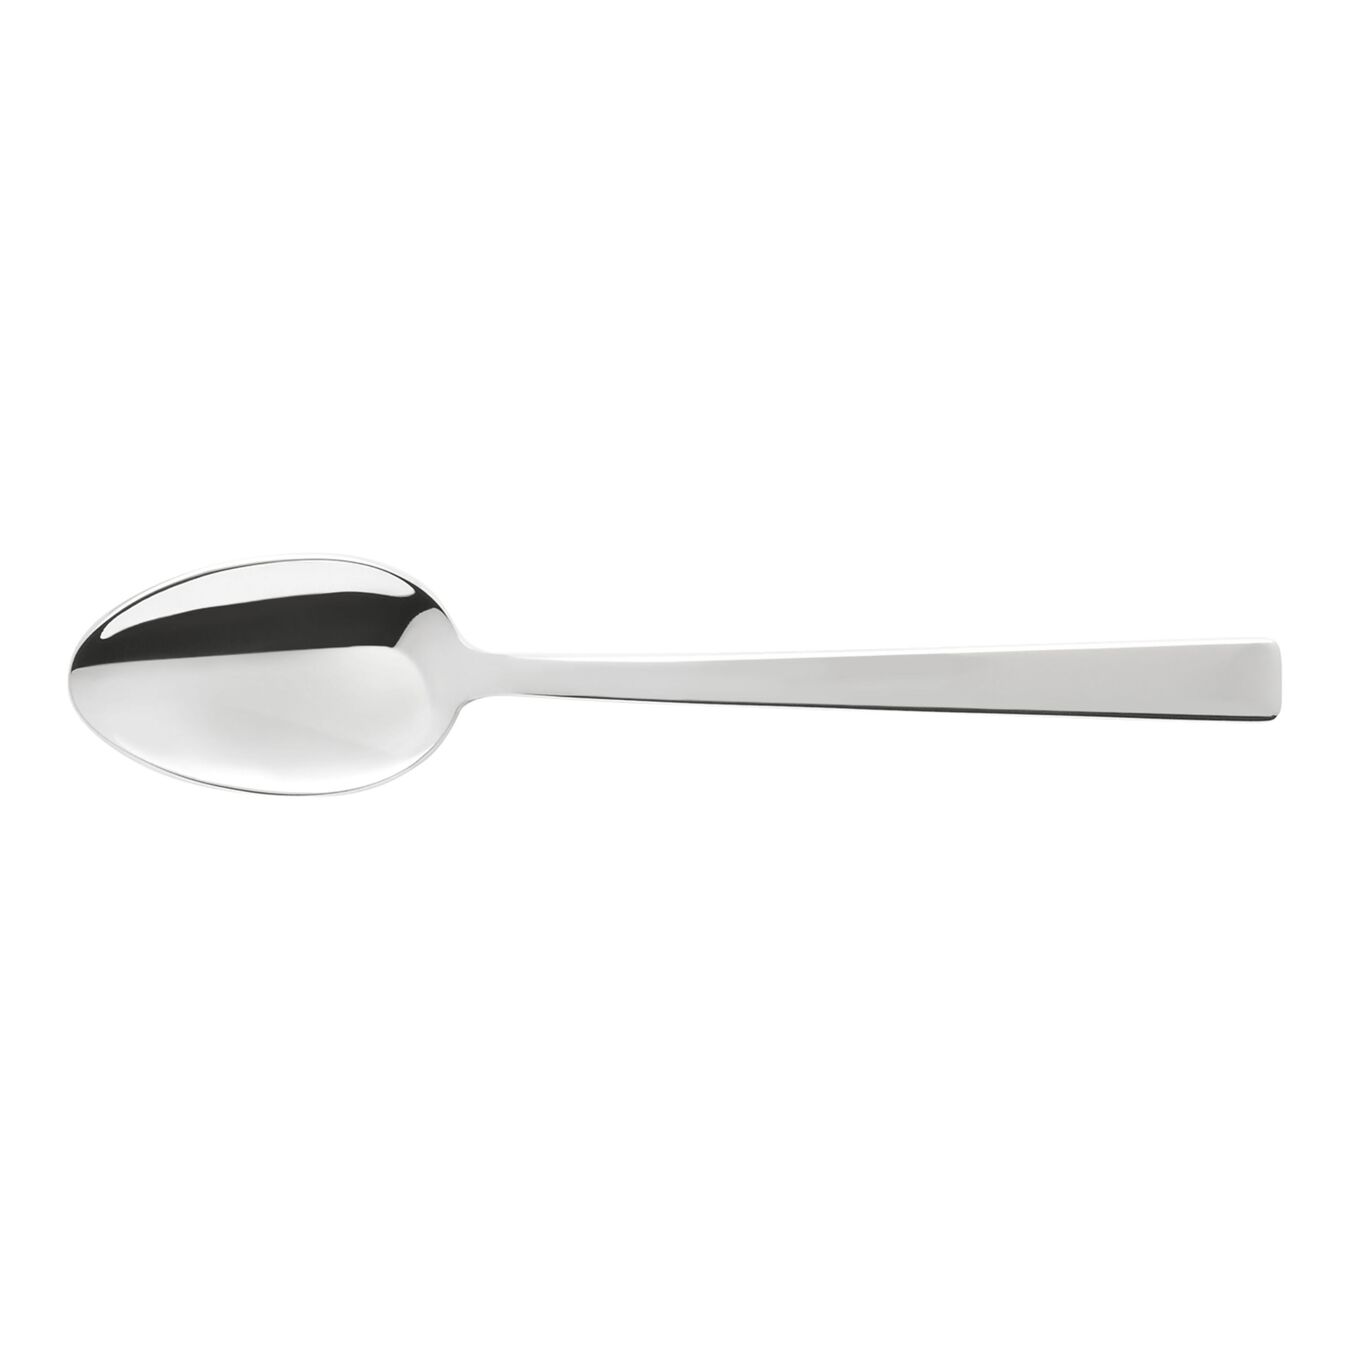 Coffee spoon, no-color | polished | 14 cm,,large 1